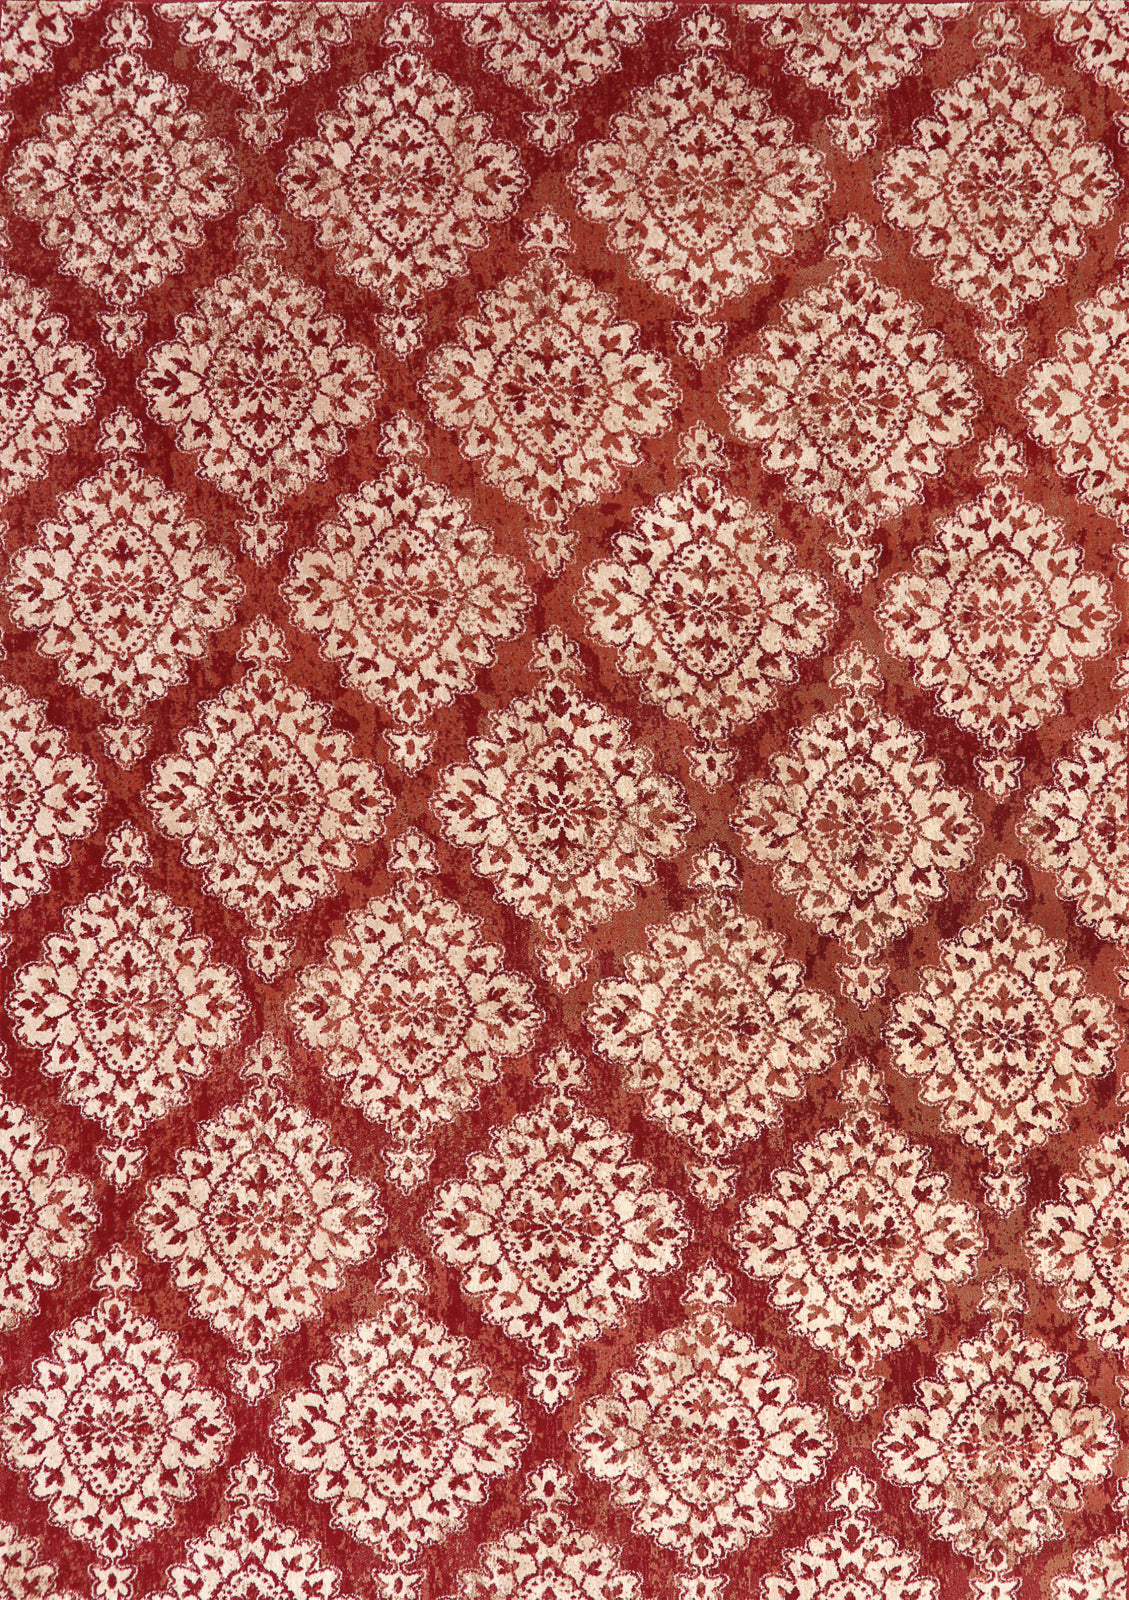 Dynamic Rugs Melody 985015 Terracotta Area Rug main image